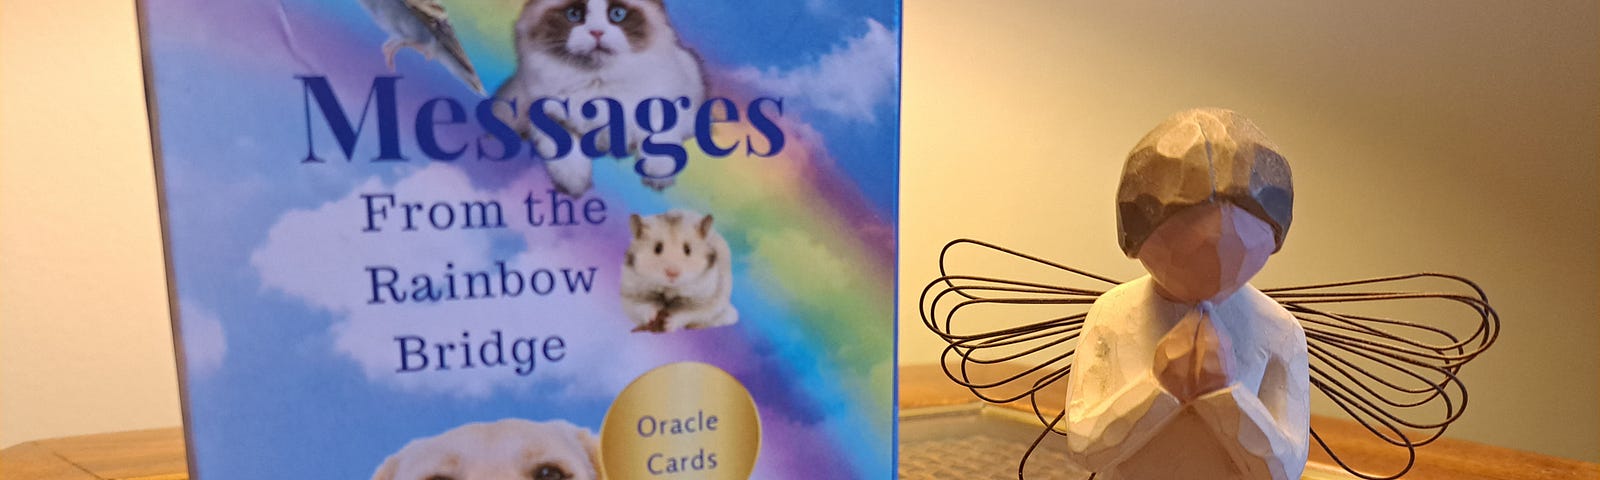 A box of oracle cards leans against a lamp on an end table with a figurine next to it of a blond haired girl with wings on her knees praying. The oracle card shows a blue sky with white cloud and a rainbow with pictures of a bird, cat, hamster, dog and rabbit. The box says: Messages From the Rainbow Bridge. Oracle Cards.